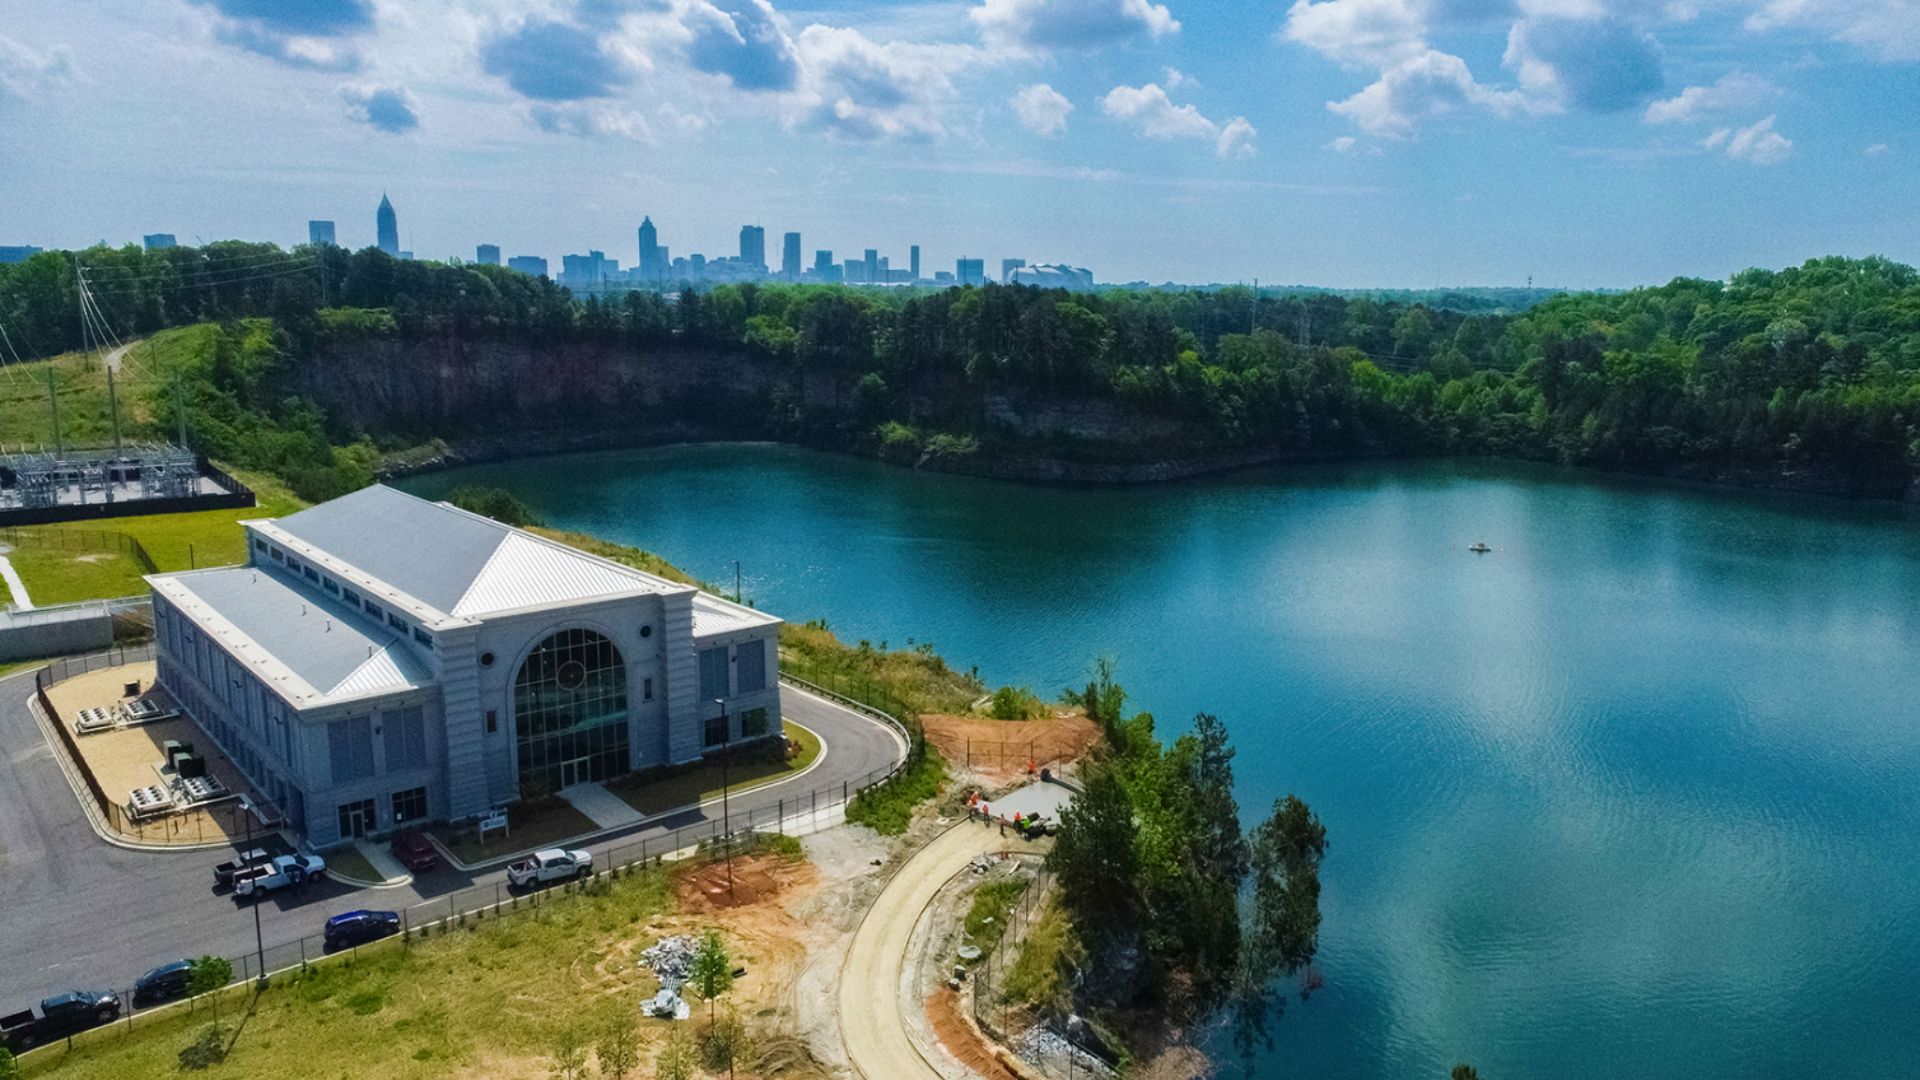 A building overlooks a giant reservoir with the Atlanta skyline in the background